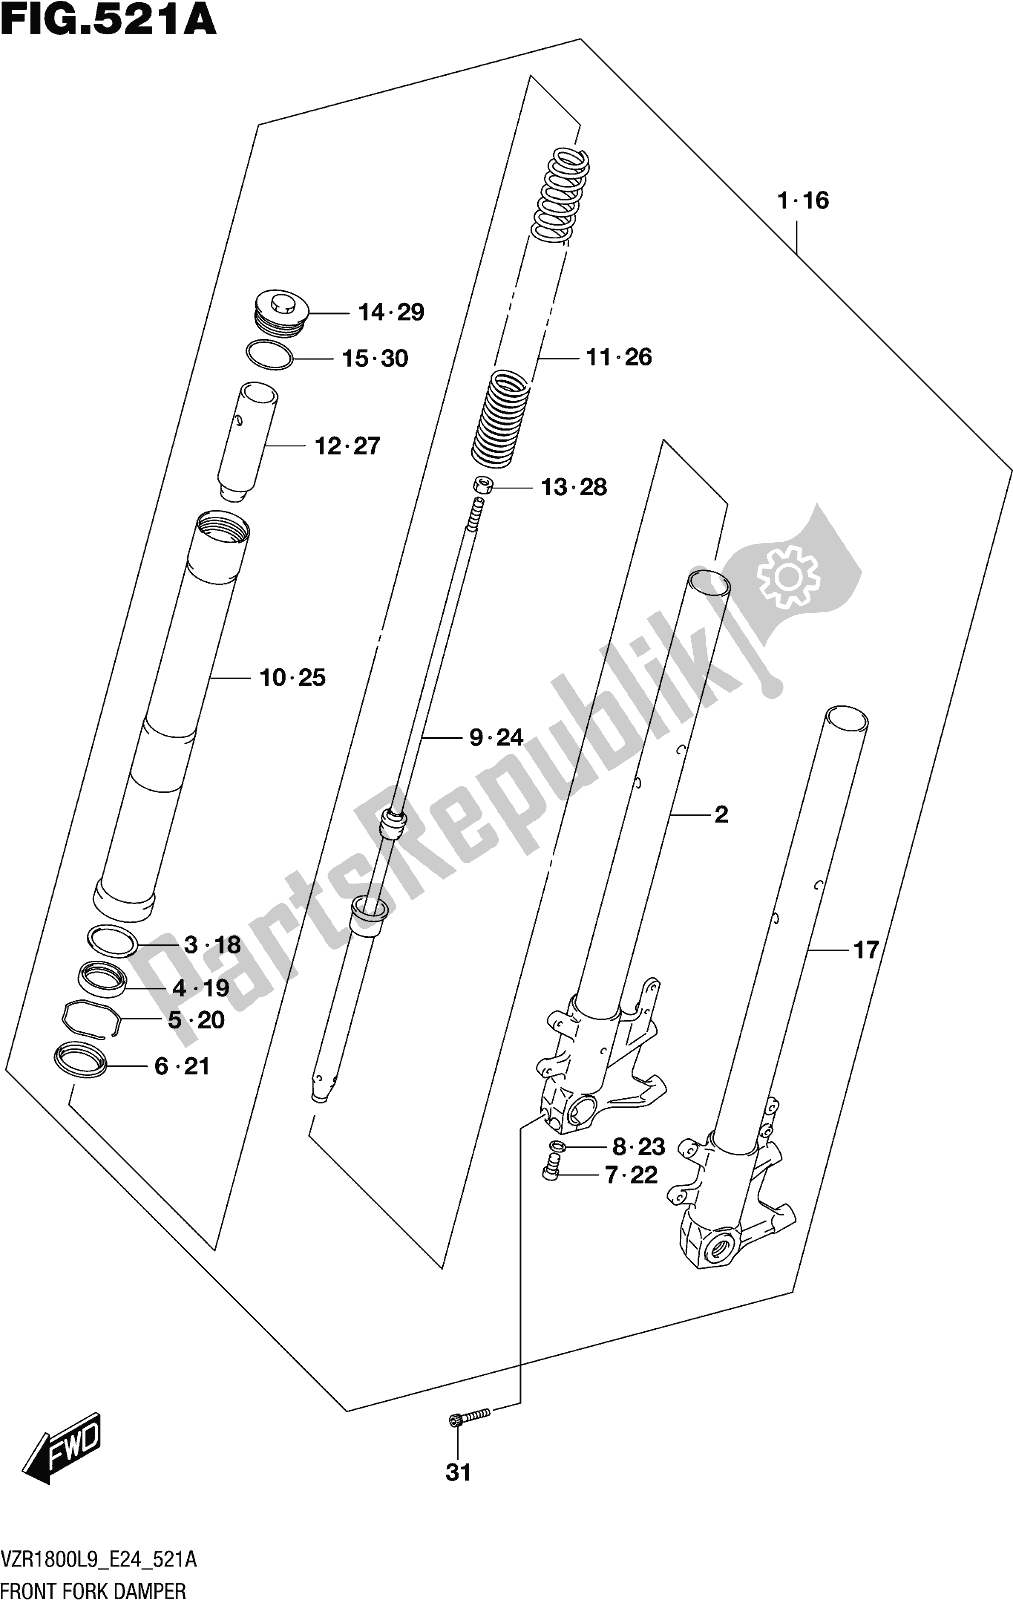 All parts for the Fig. 521a Front Fork Damper (vzr1800l9 E24) of the Suzuki VZR 1800 2019